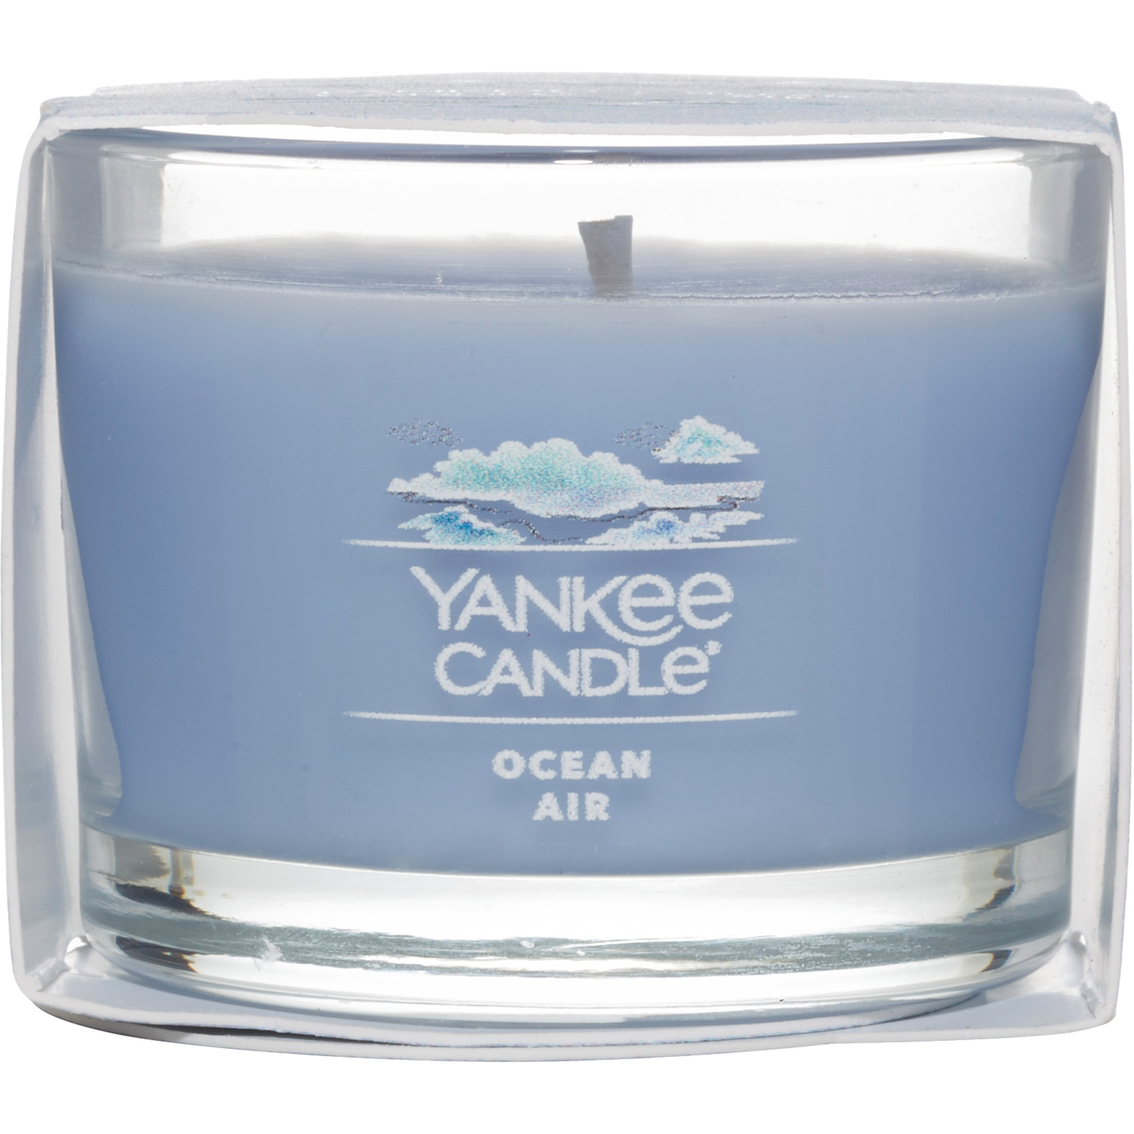 Yankee Candle Ocean Air Filled Votive Mini Candle, Candles & Home  Fragrance, Household